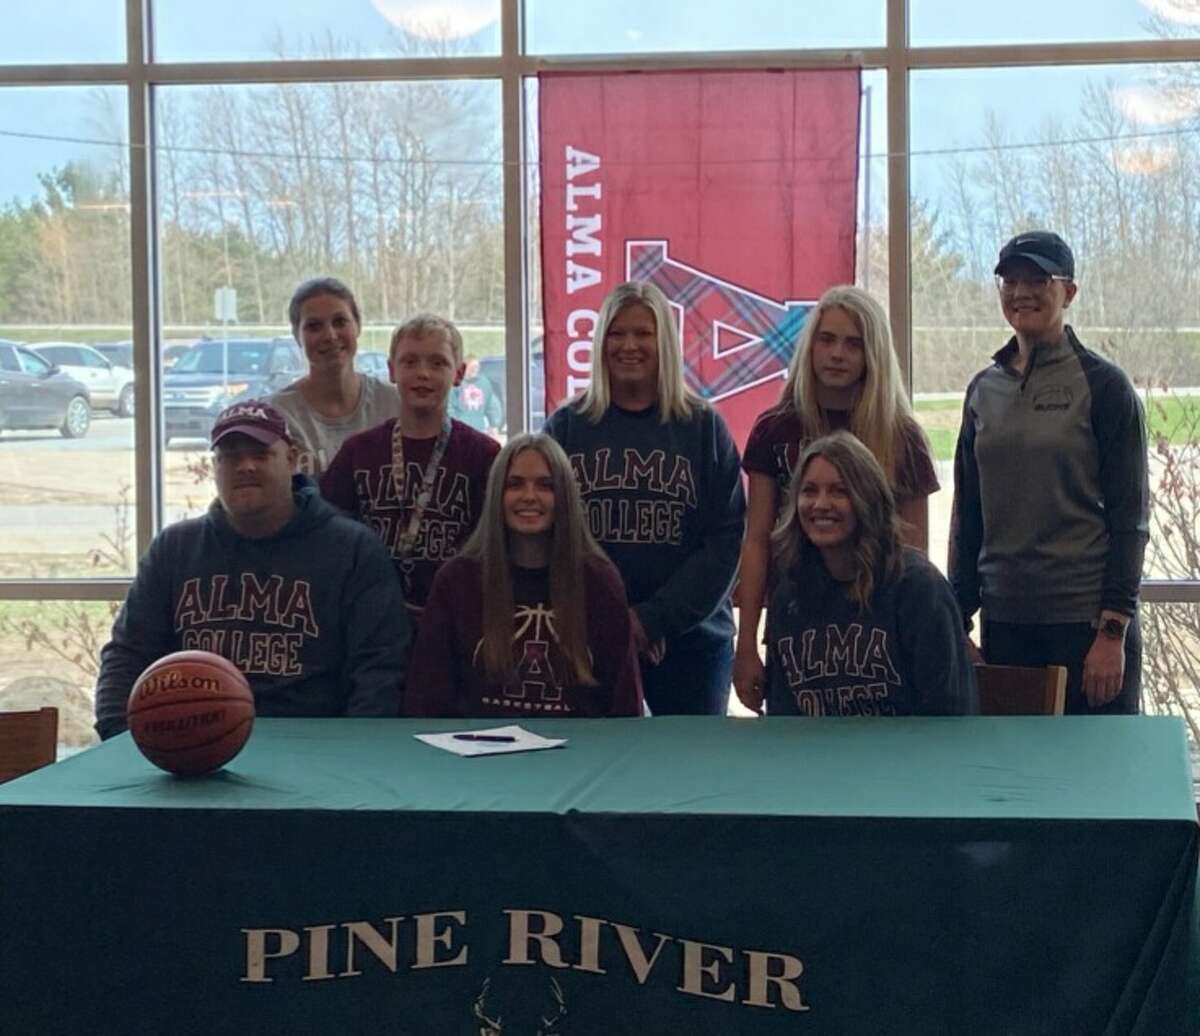 Attending Hailey Wanstead's signing in Pine River to play college basketball at Alma College recently were, from left, her parents Eric and Jessie Wanstead with Hailey in the midde; back, from left, assistant Pine River coach Deanna Draper, brother Tristan Wanstead, Pine River head coach Paula Justin, sister Madie Wanstead and assistant coach Jamie Martin.